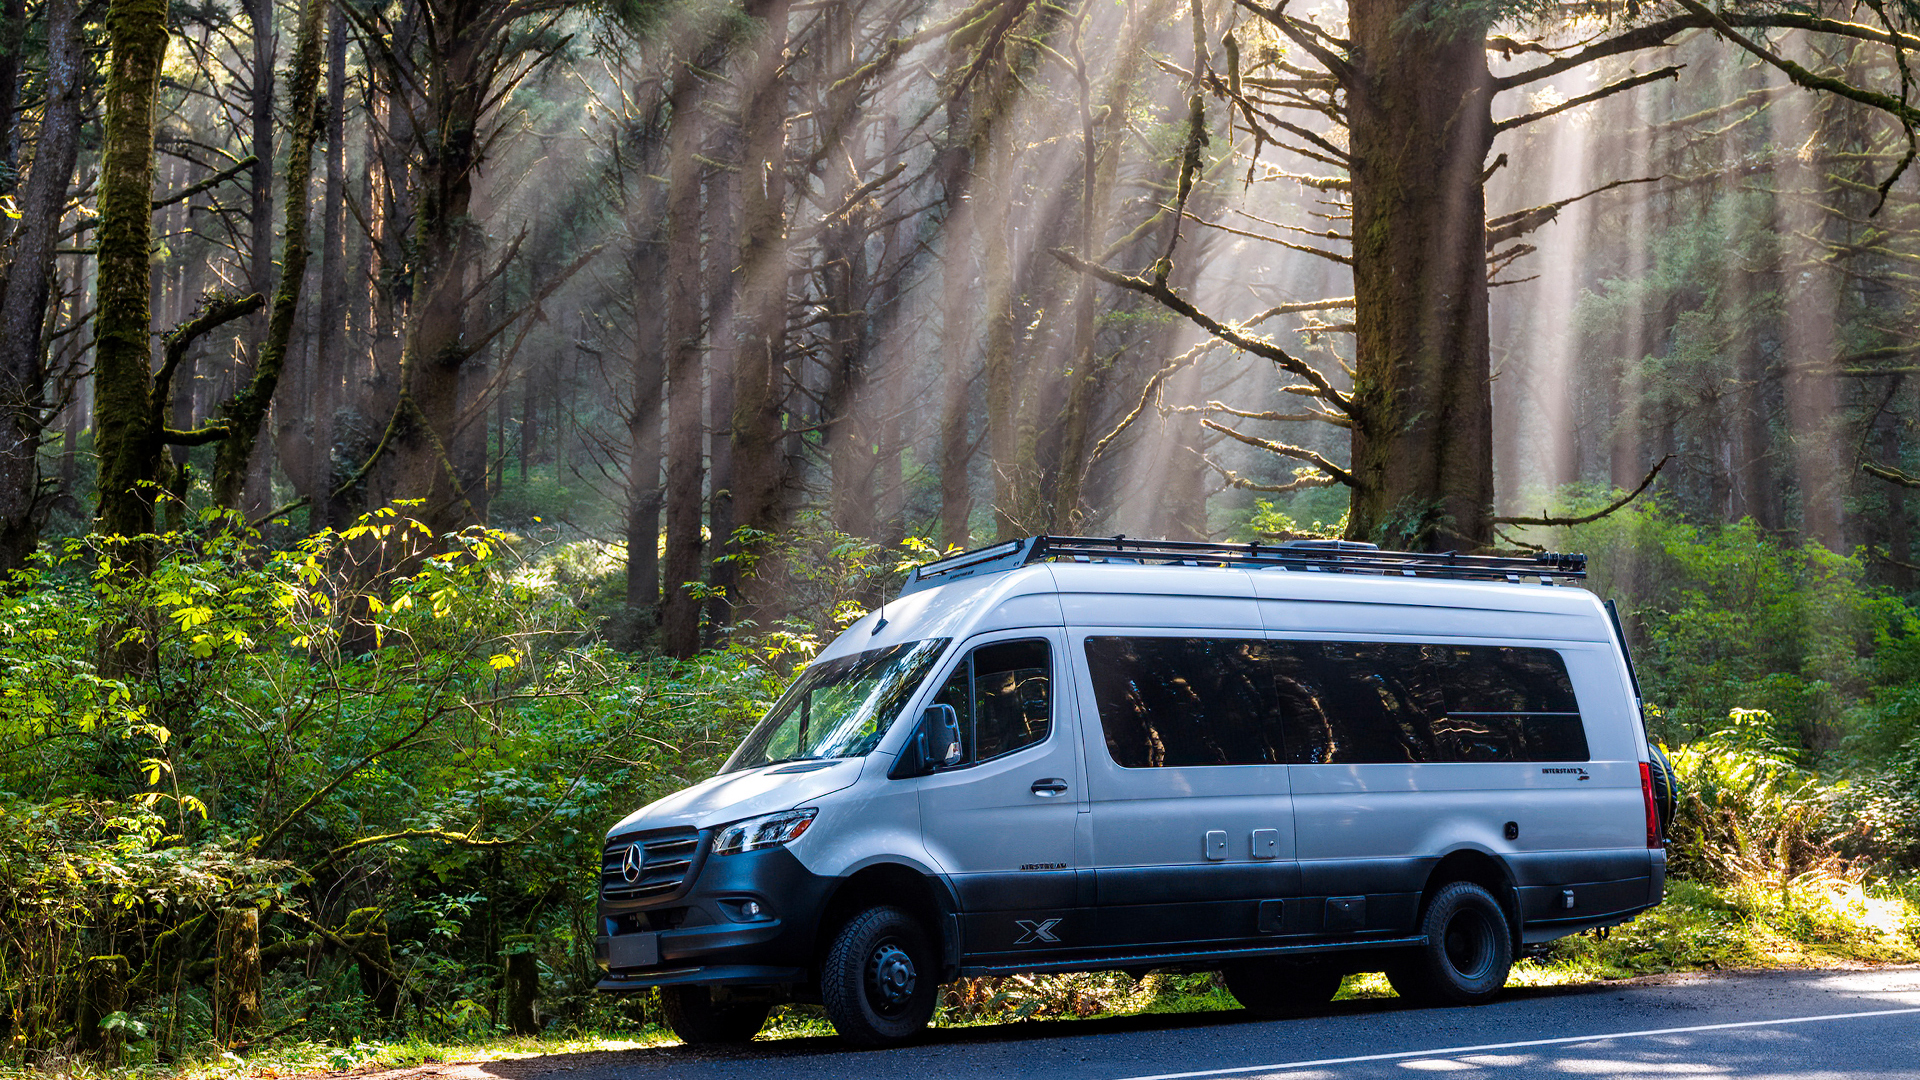 The sun shining through trees in a forest on an Airstream 24X Class B Motorhome